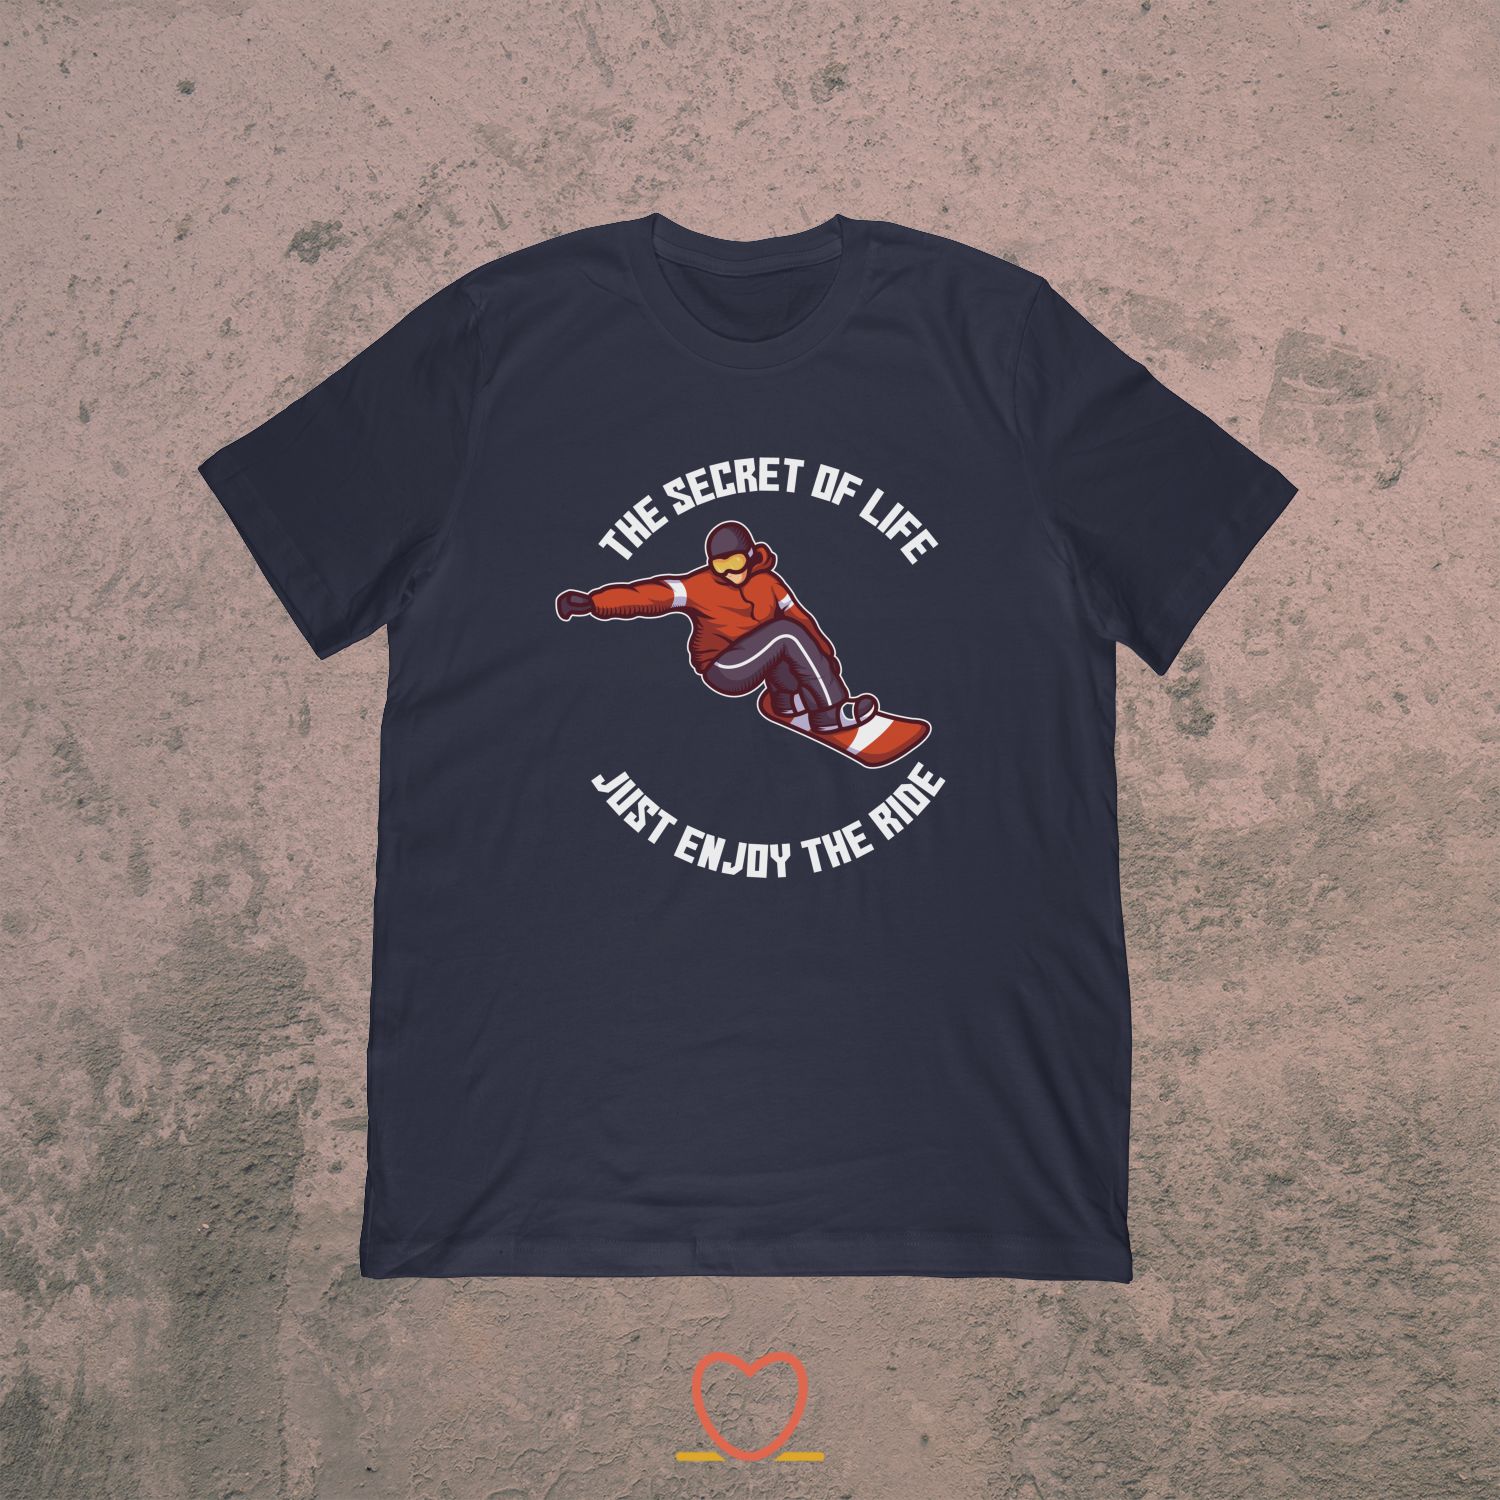 The Secret Of Life Just Enjoy The Ride – Snowboard Tee